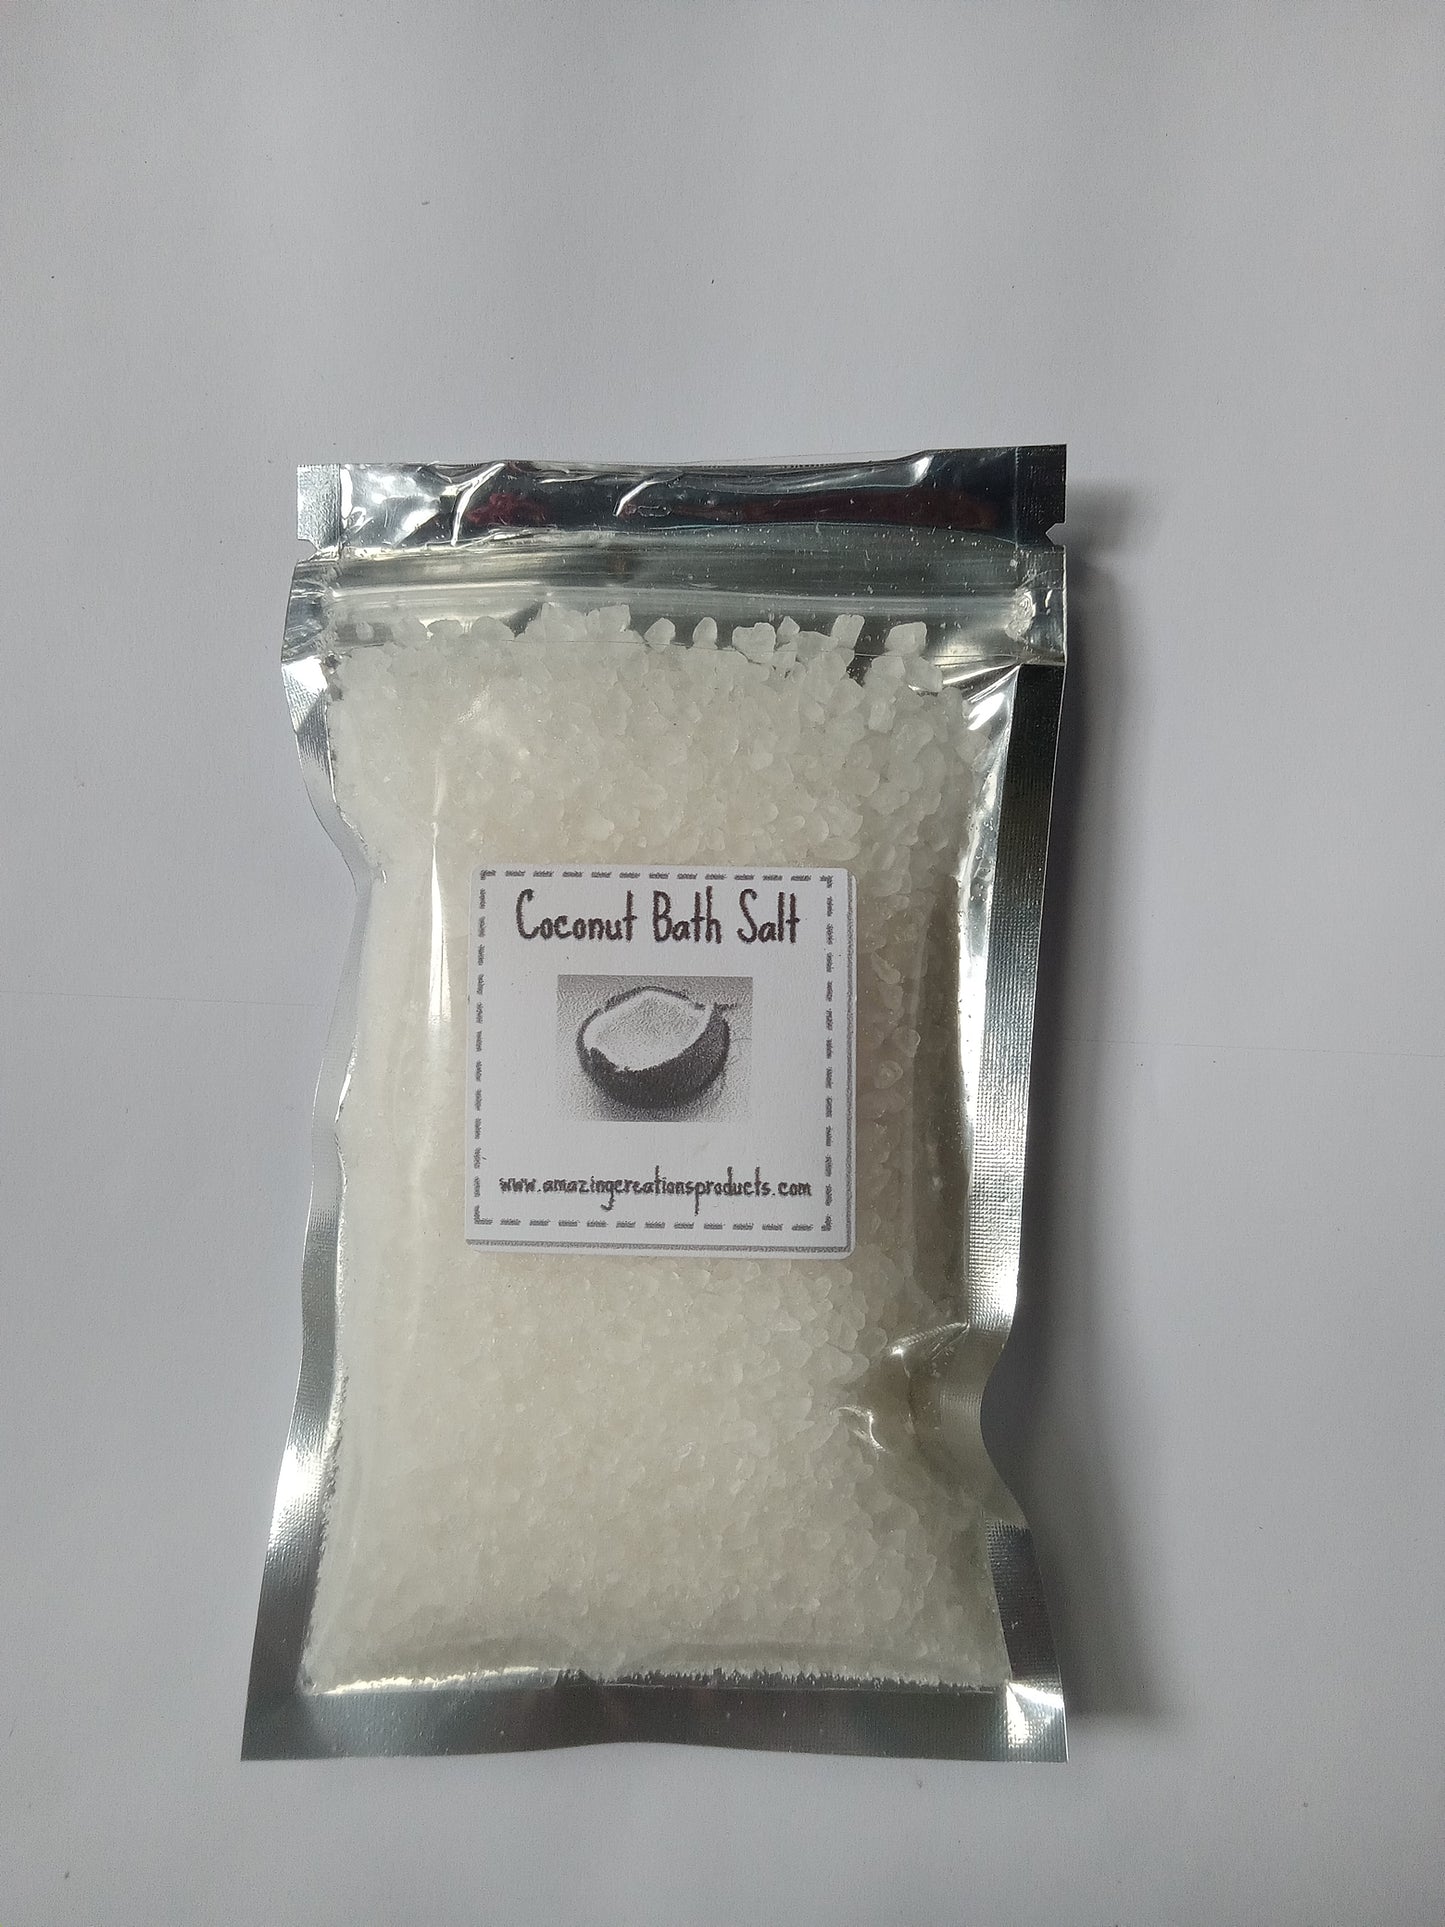  Coconut Bath Salt -  available at Amazing Creations Products . Grab yours for $10 today!